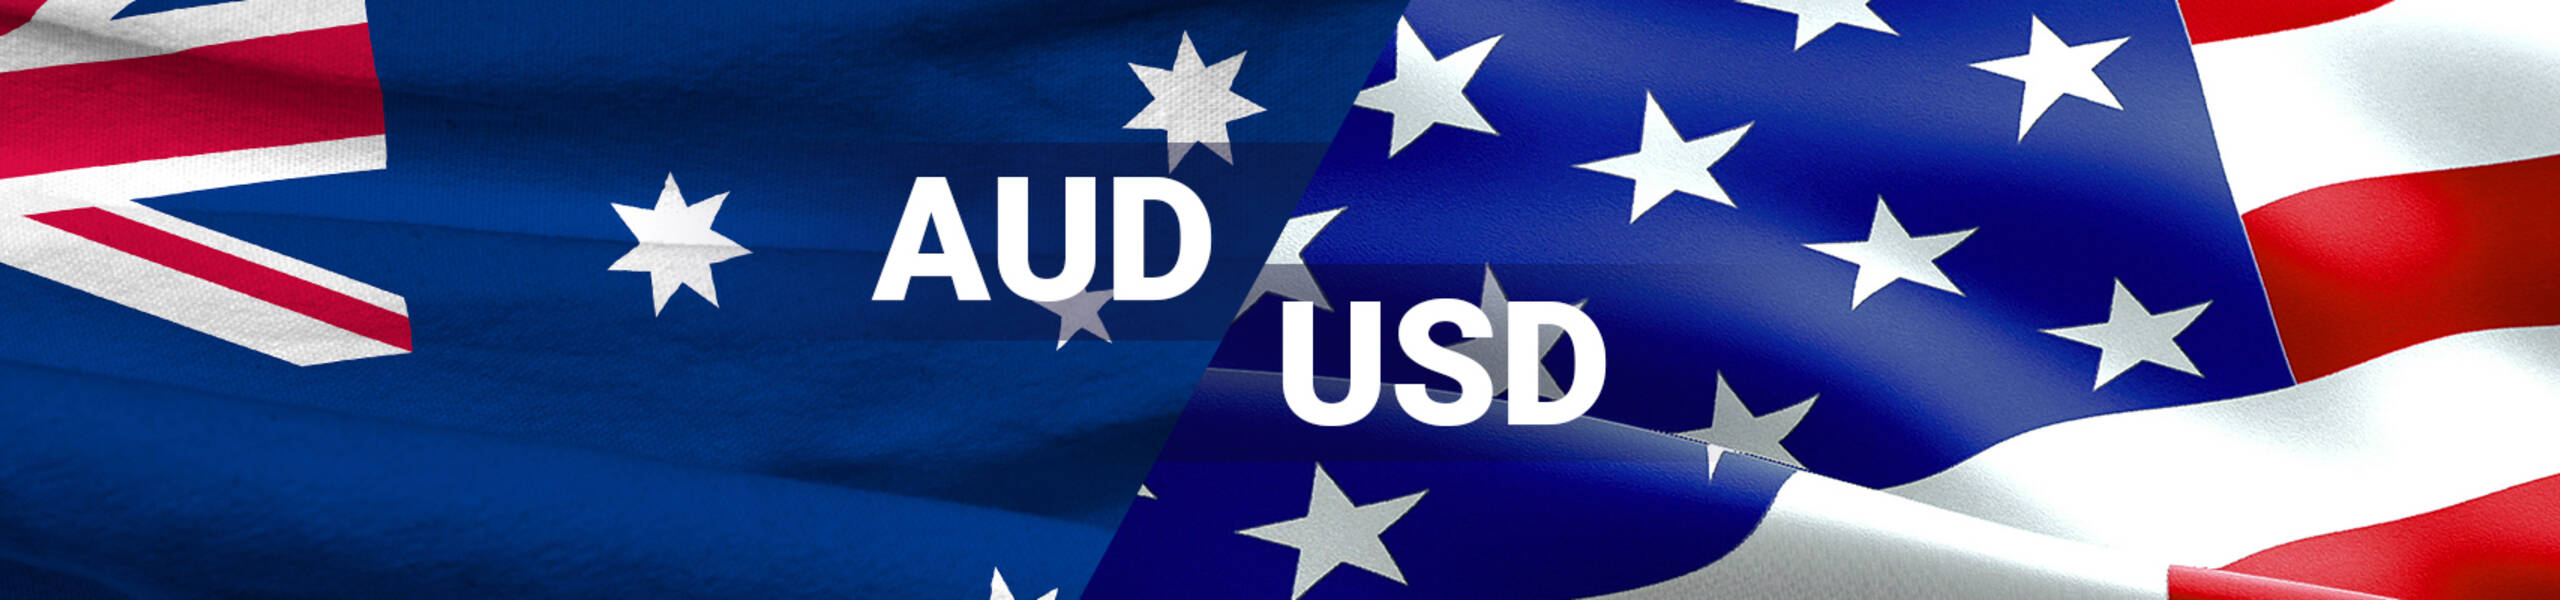 AUD/USD: aussie bounced from SSB